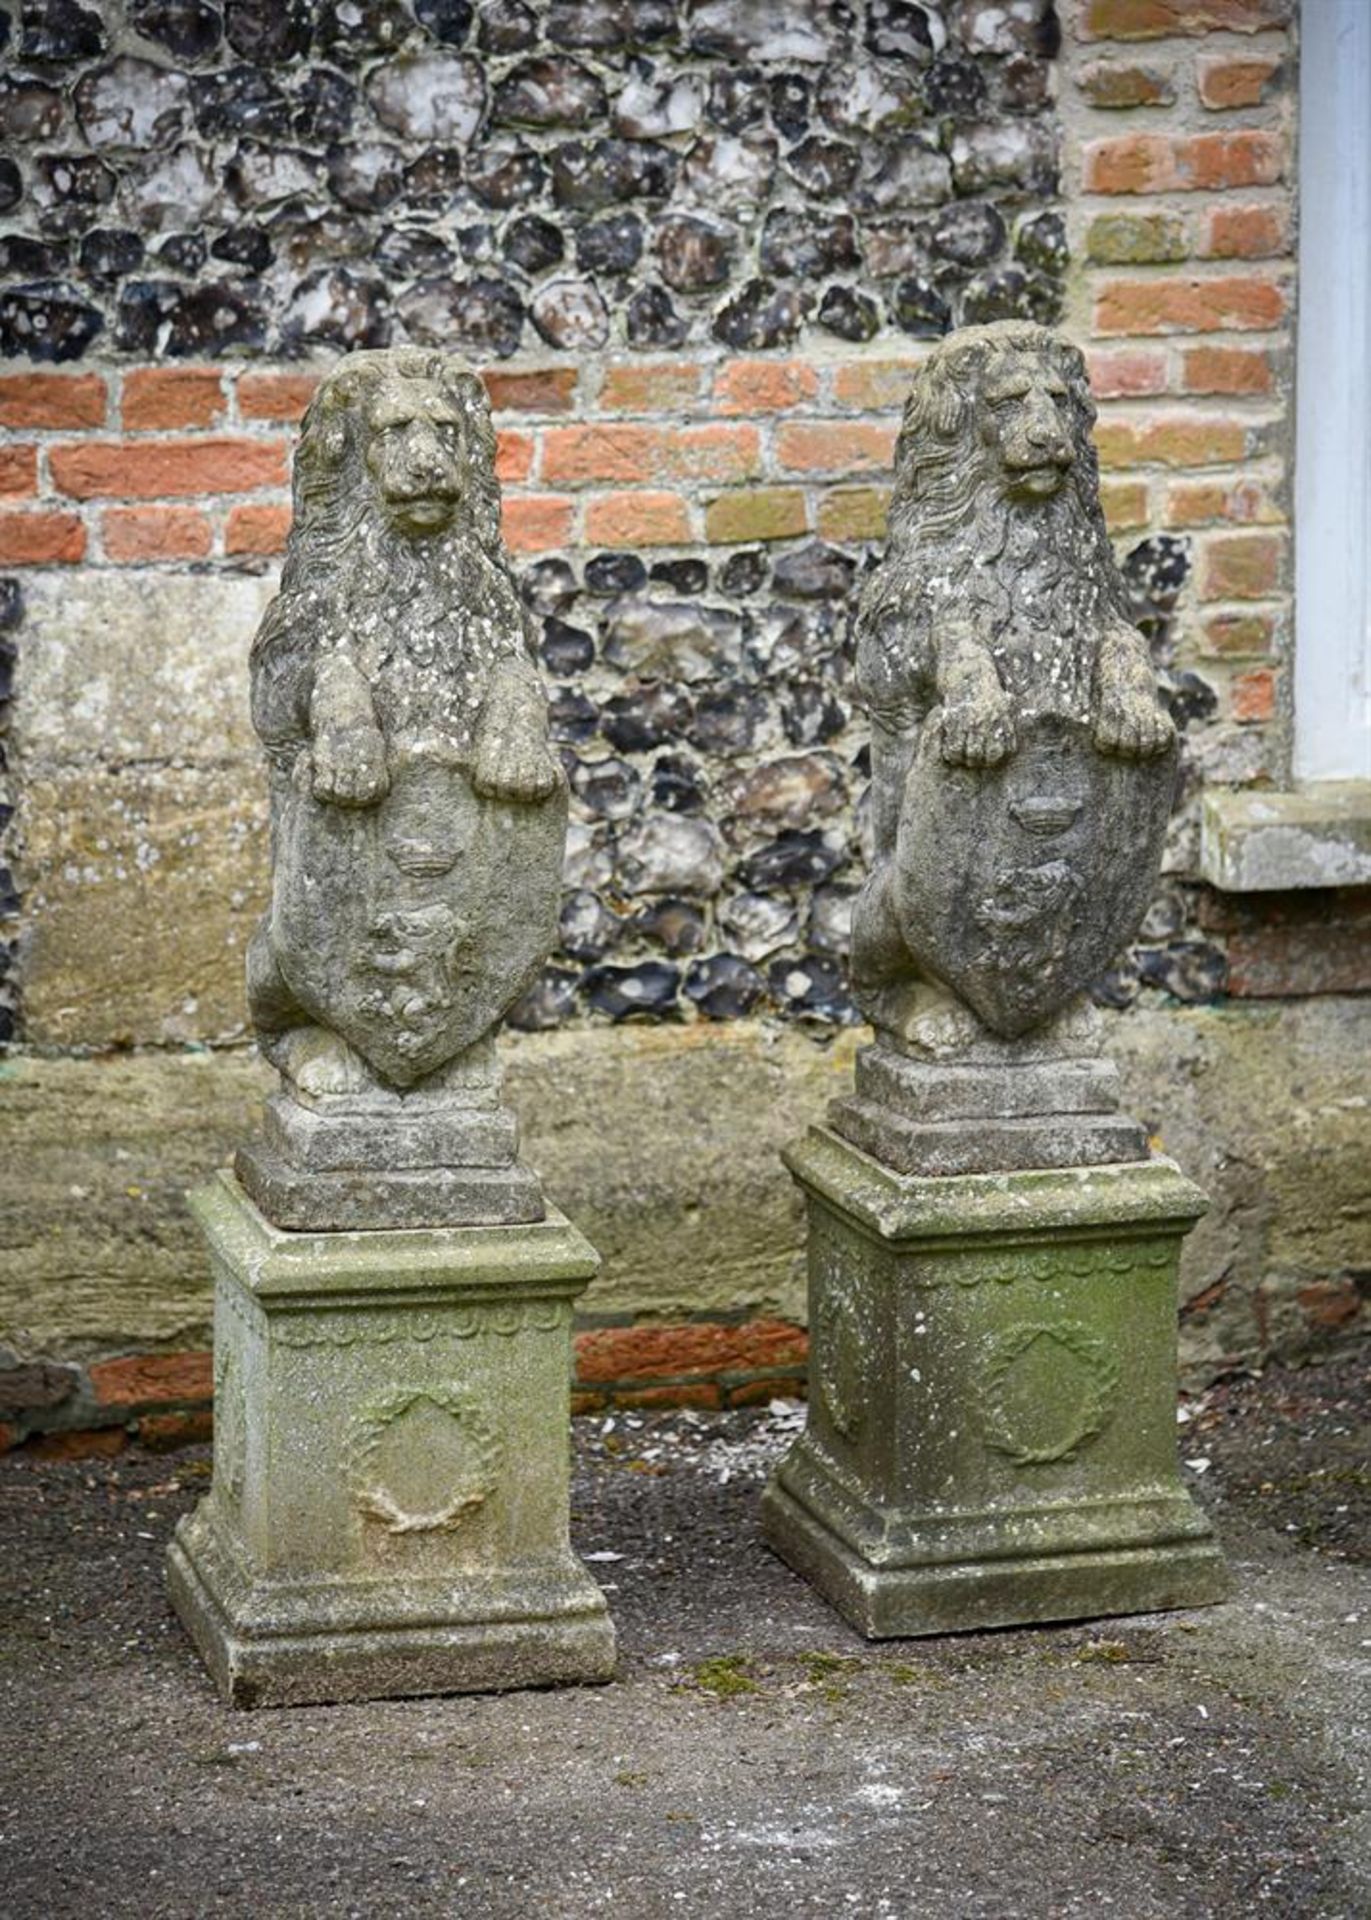 A PAIR OF COMPOSITION STONE HERALDIC LIONS, 20TH CENTURY - Image 3 of 3